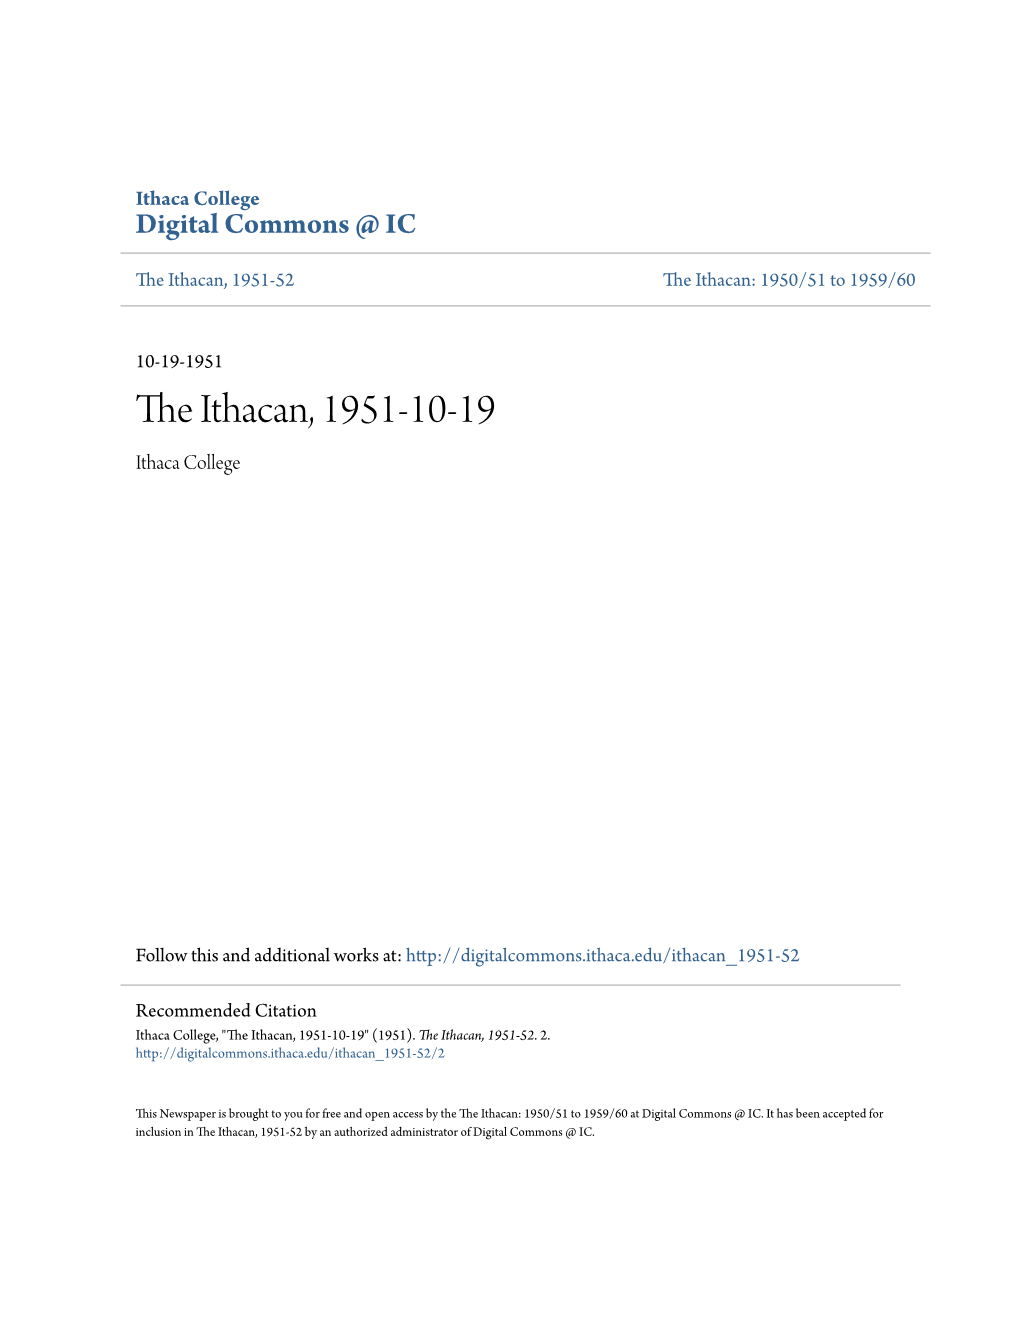 The Ithacan, 1951-10-19